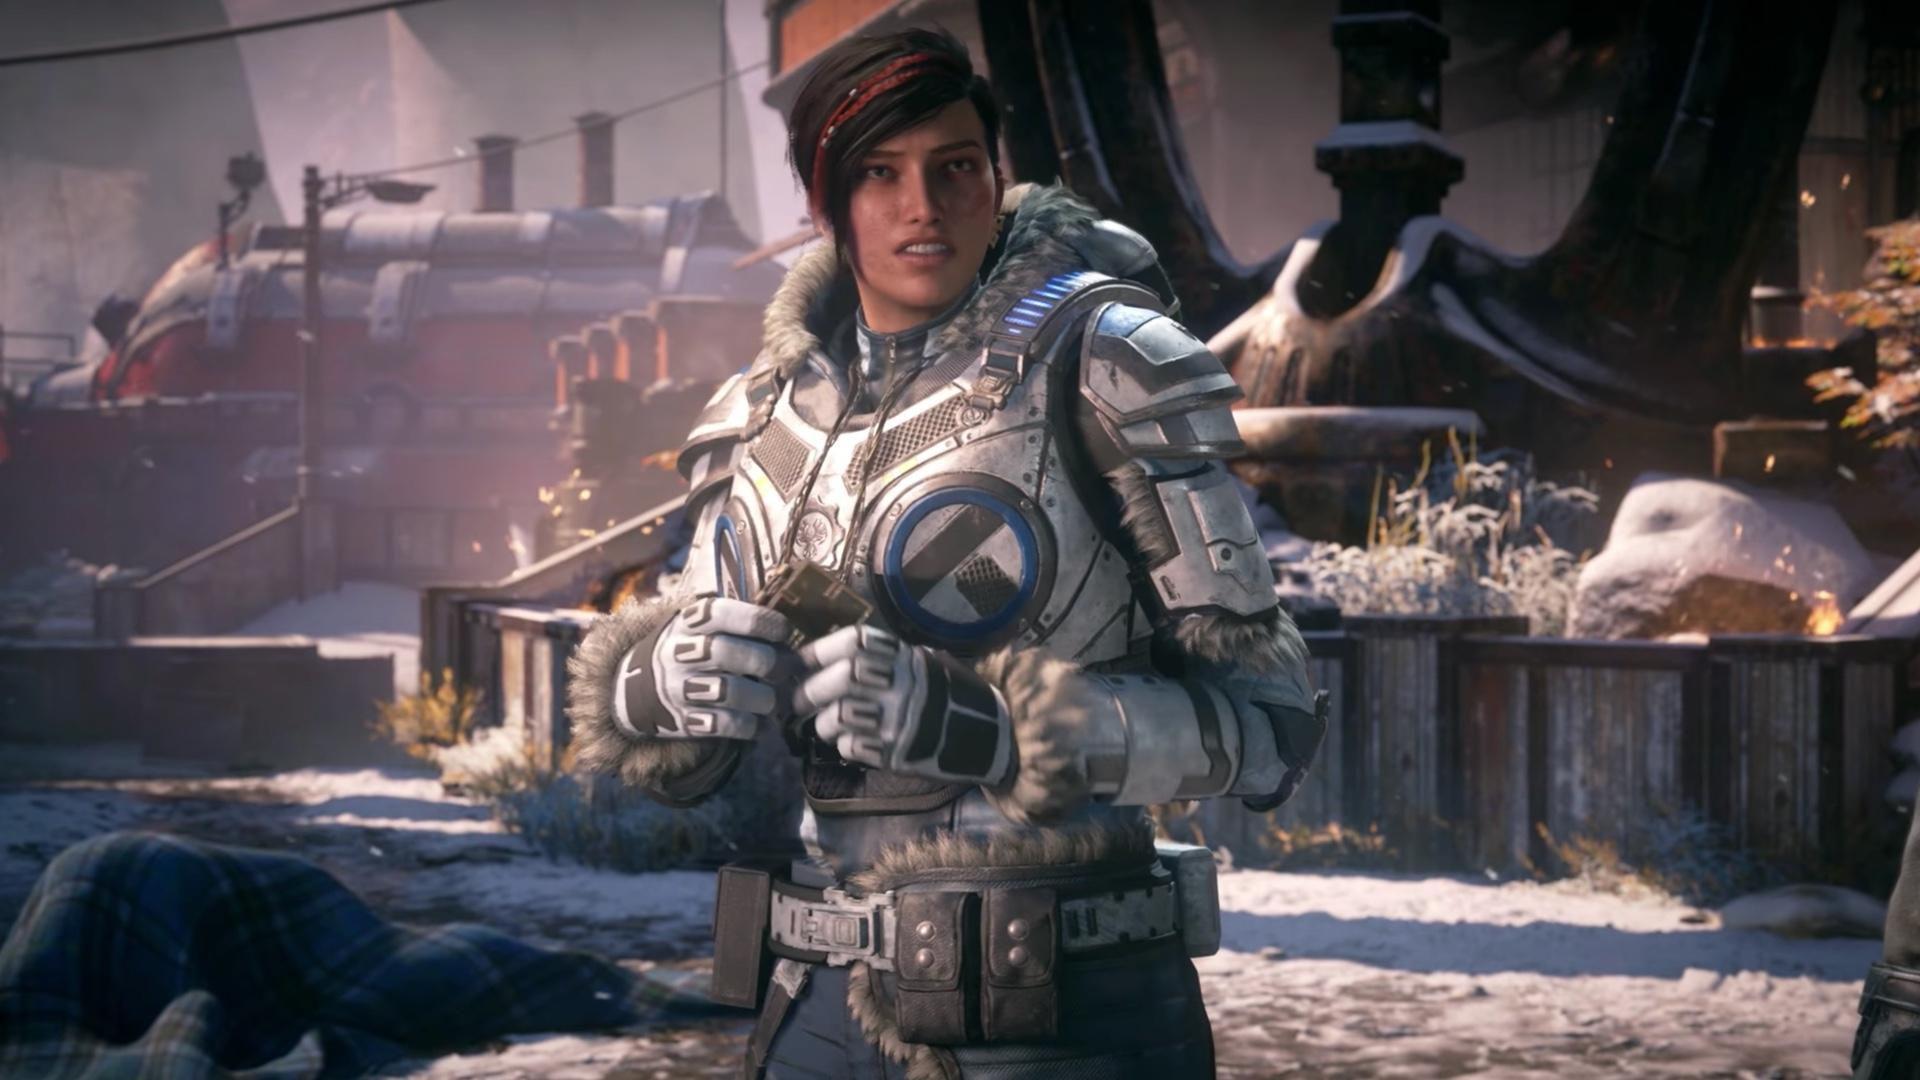 E3 2019: Gears 5 gets a brand new trailer and an official